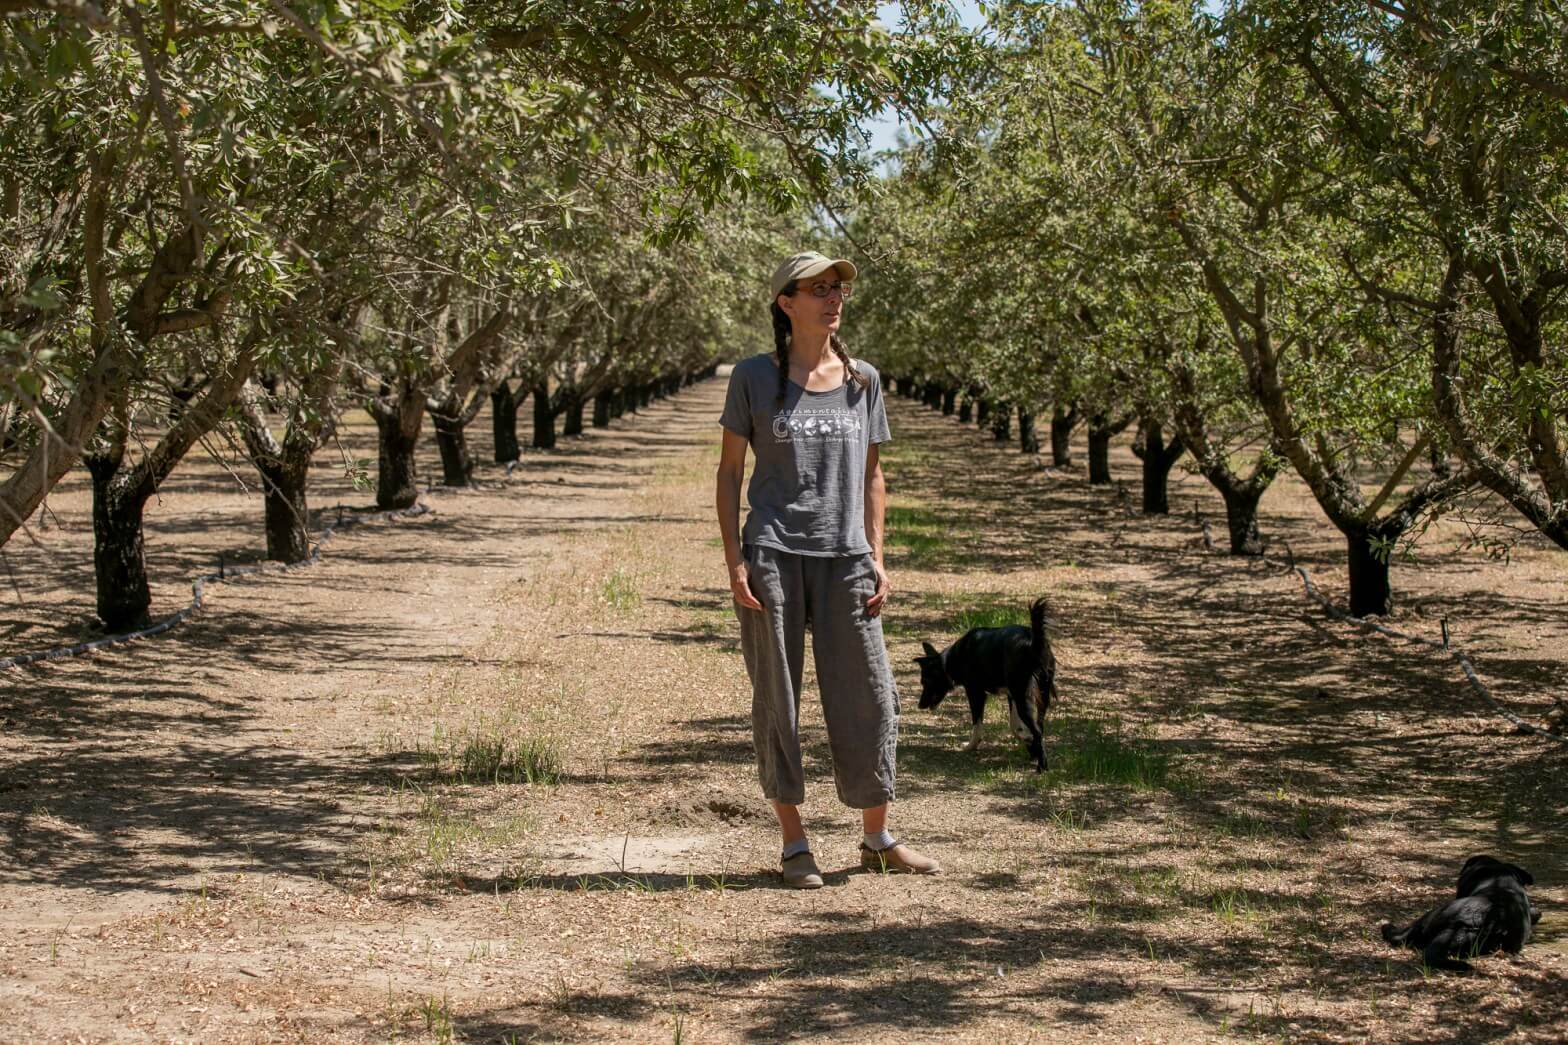 Grower Christine Gemperle, shown in her almond grove in Ceres, has experimented with new irrigation systems and almond breeds to cope with her dry, salty land.